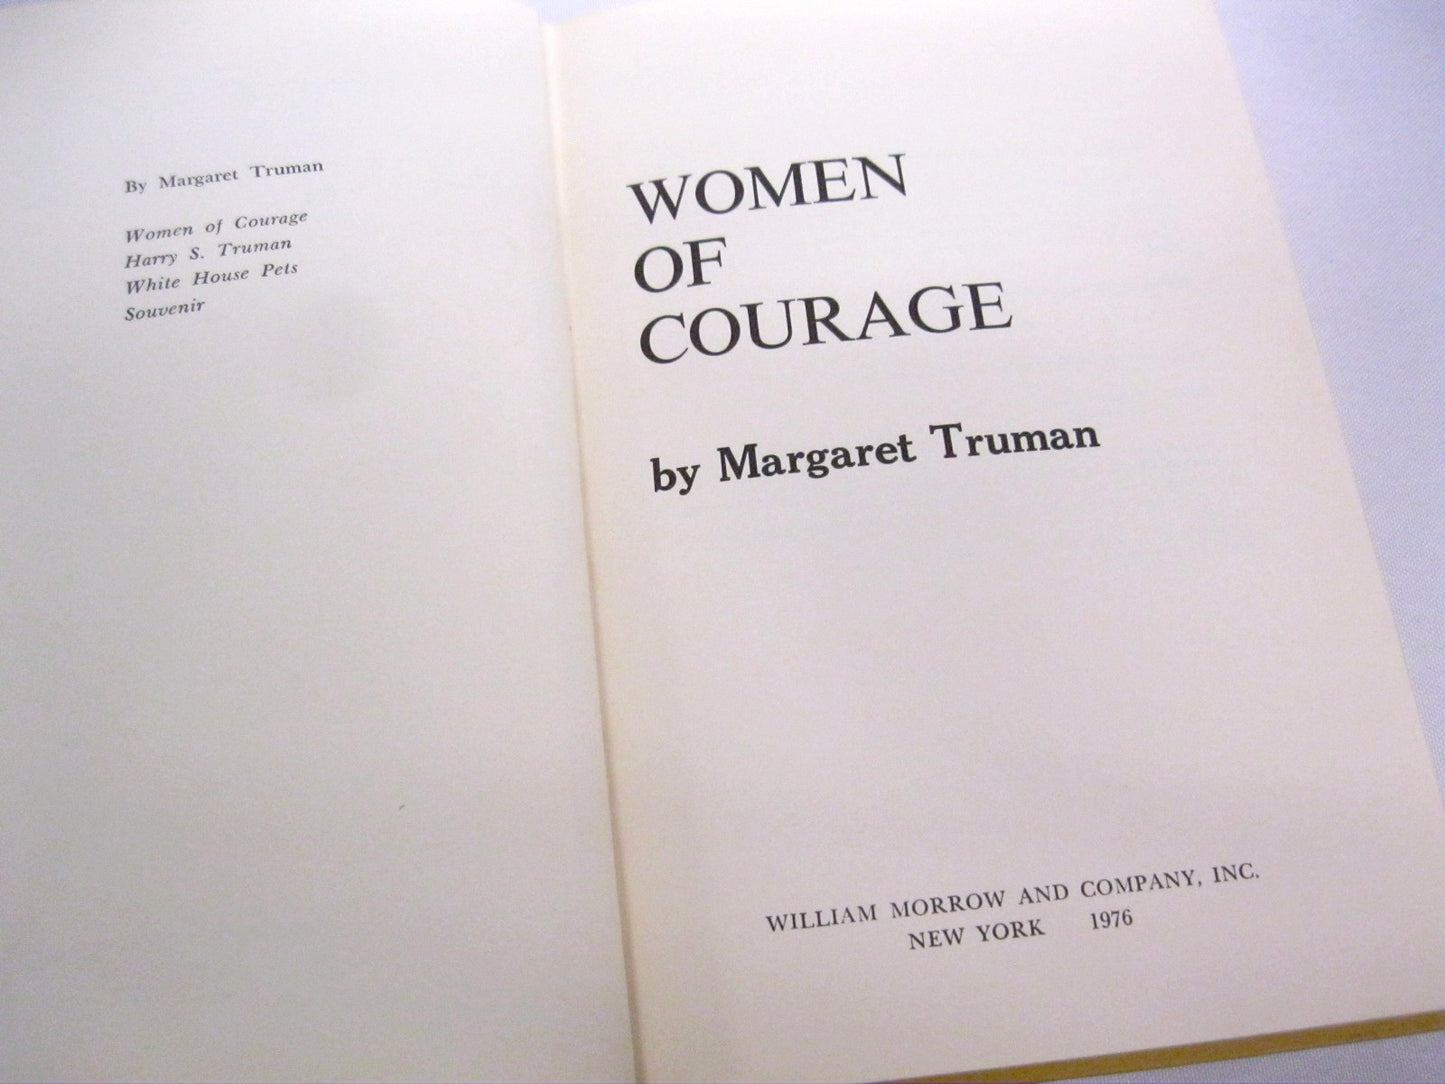 Women of Courage by Margaret Truman